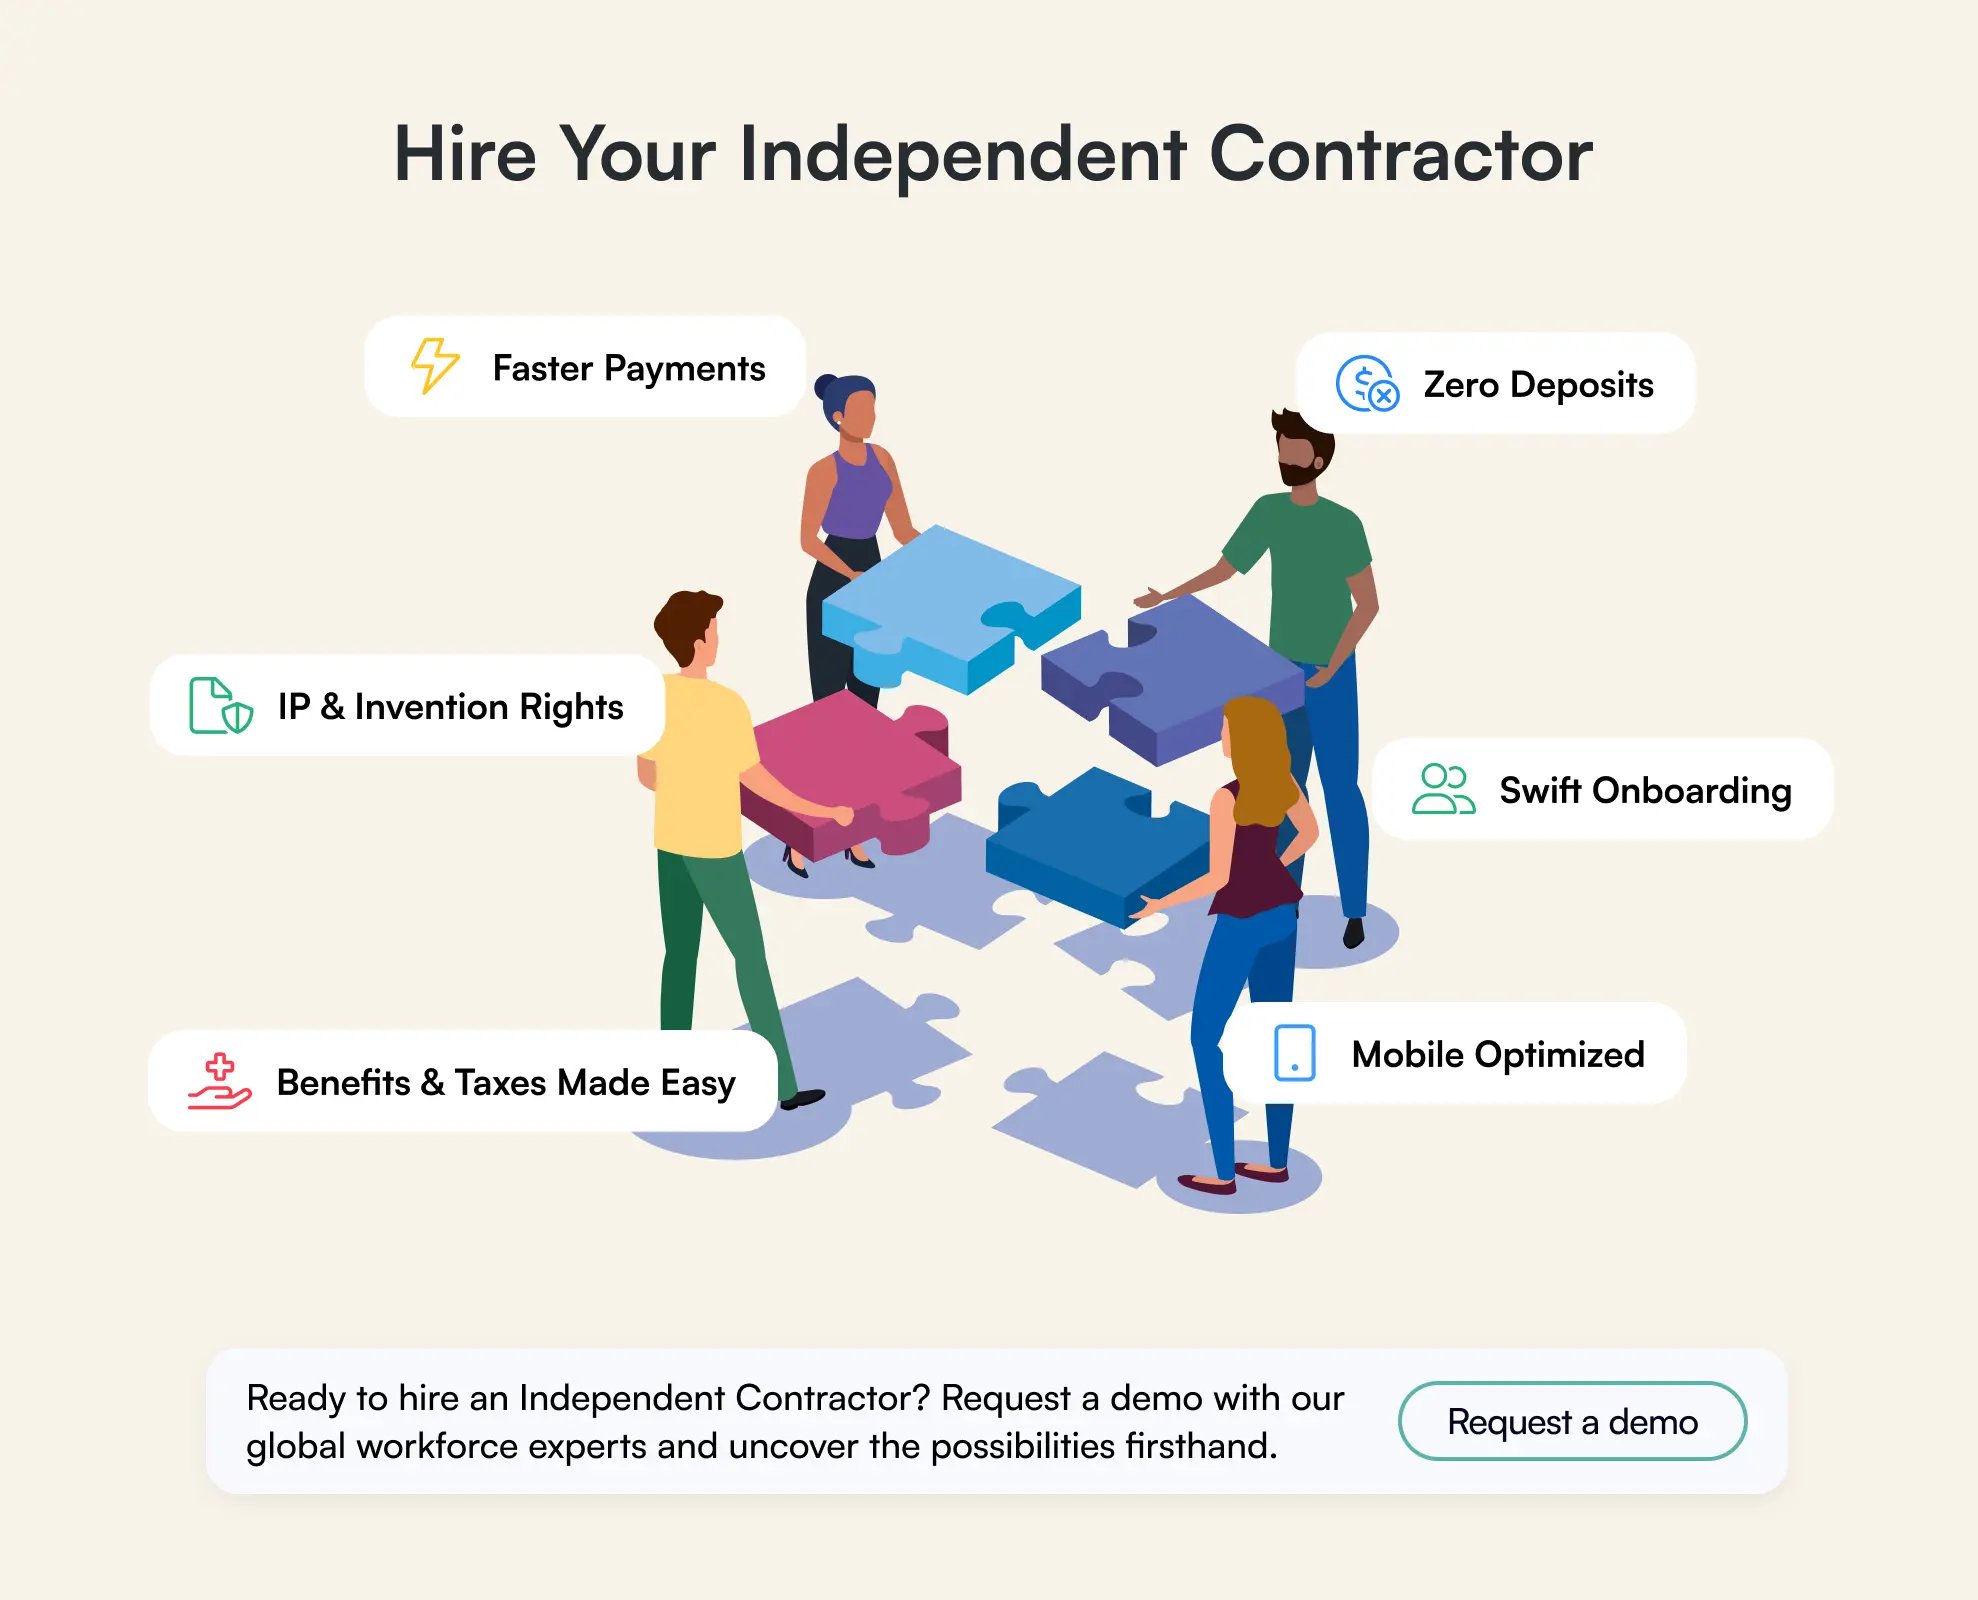 Hire your independent contractor